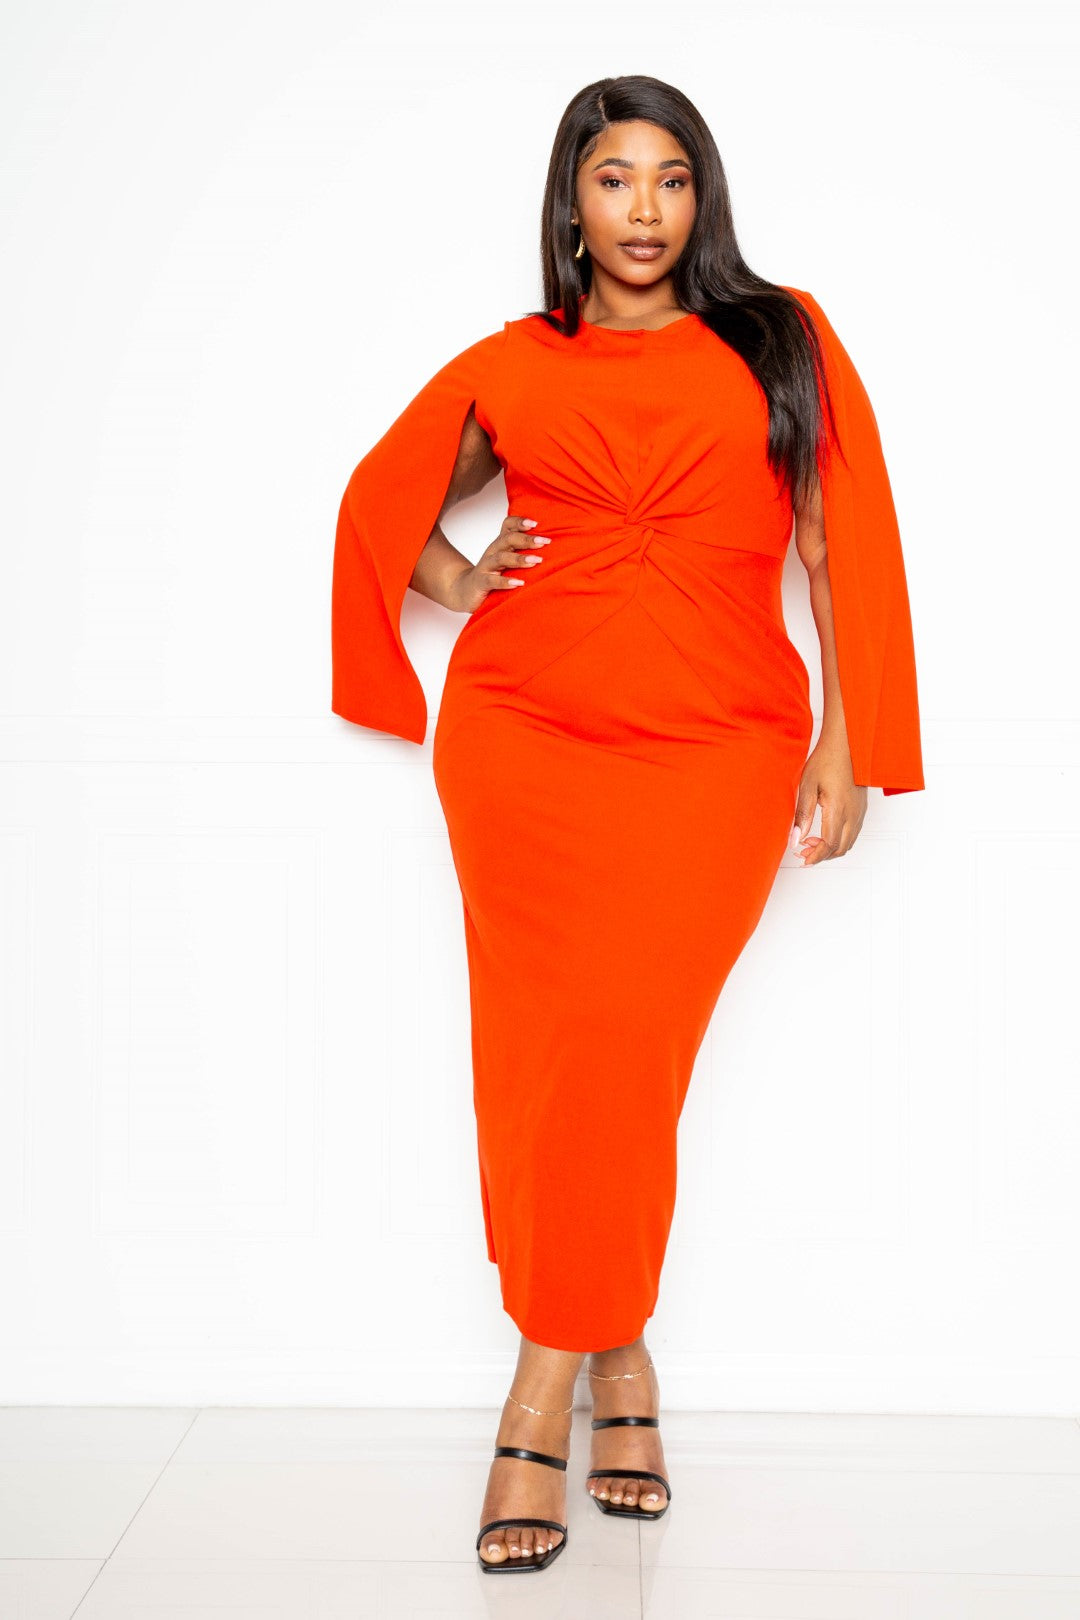 Cape Sleeve Dress With Knot Detail | Black, Orange Red, PLUS SIZE, PLUS SIZE DRESSES, SALE, SALE PLUS SIZE | Style Your Curves